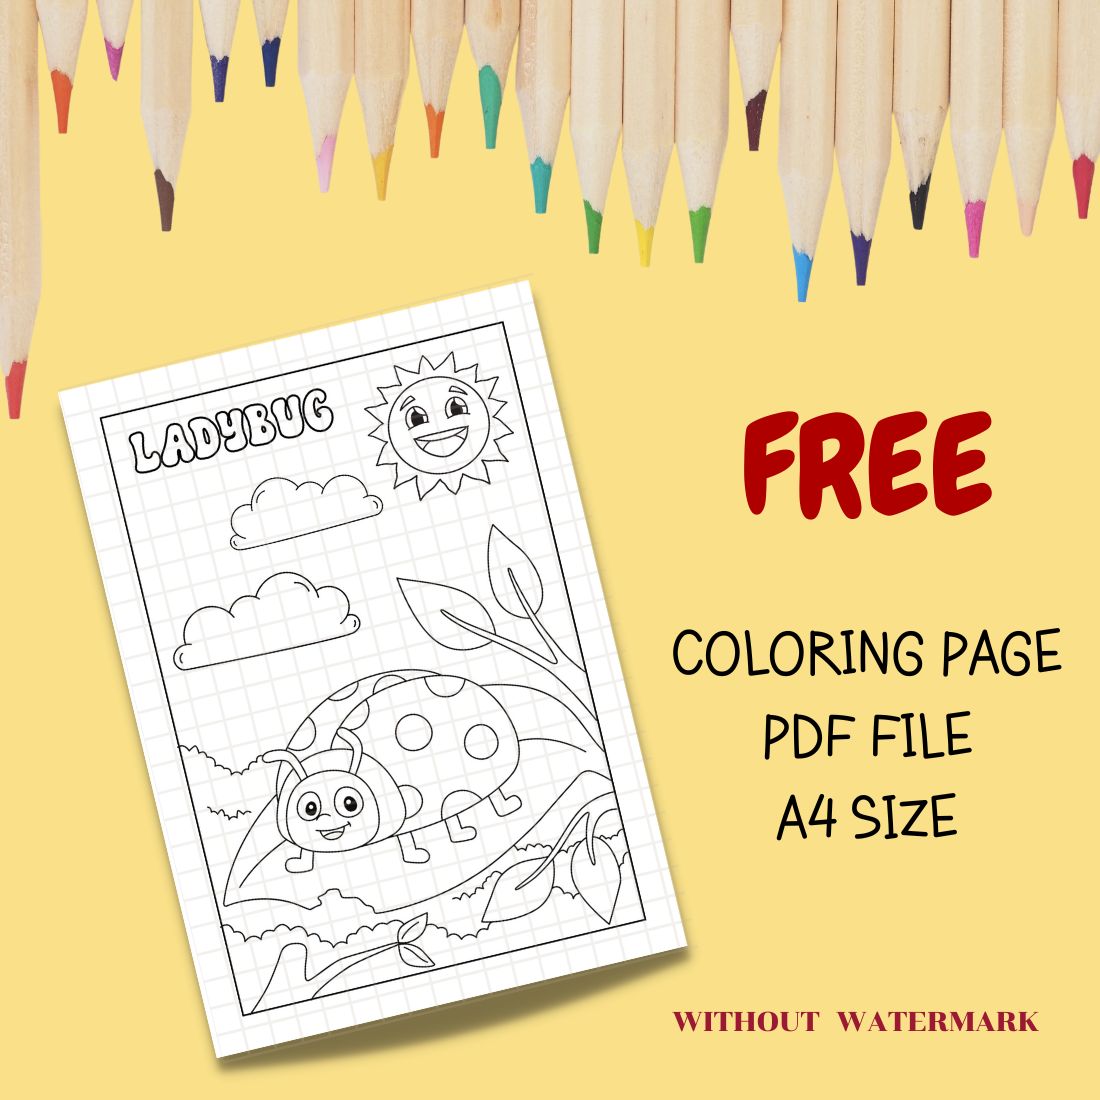 FREE LADYBUG COLORING PAGE cover image.